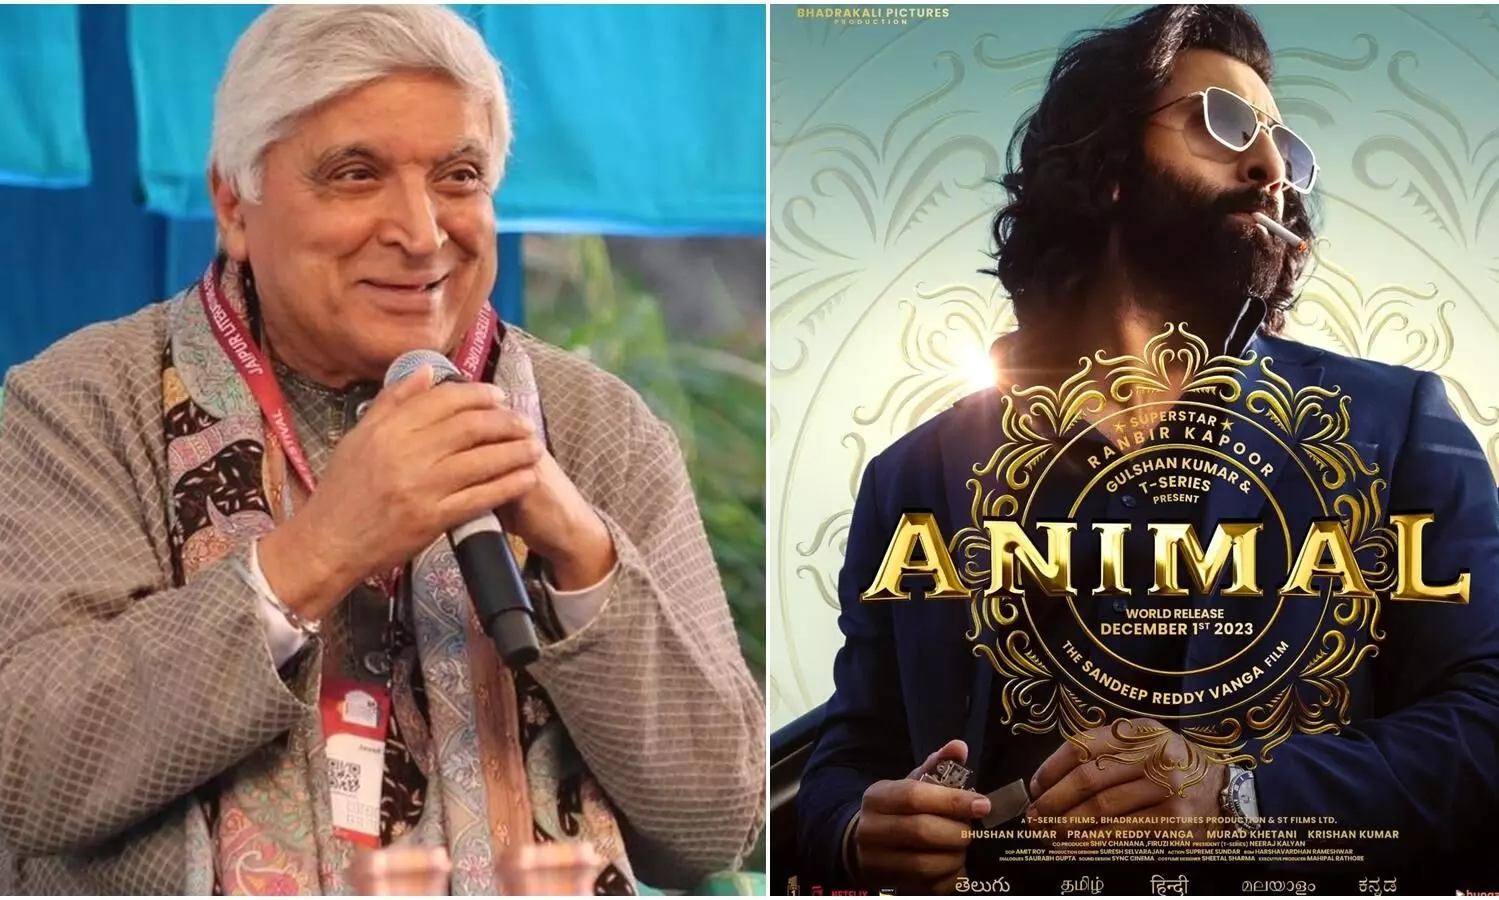 Writers need to think; success of films like Animal ‘dangerous’: Javed Akhtar